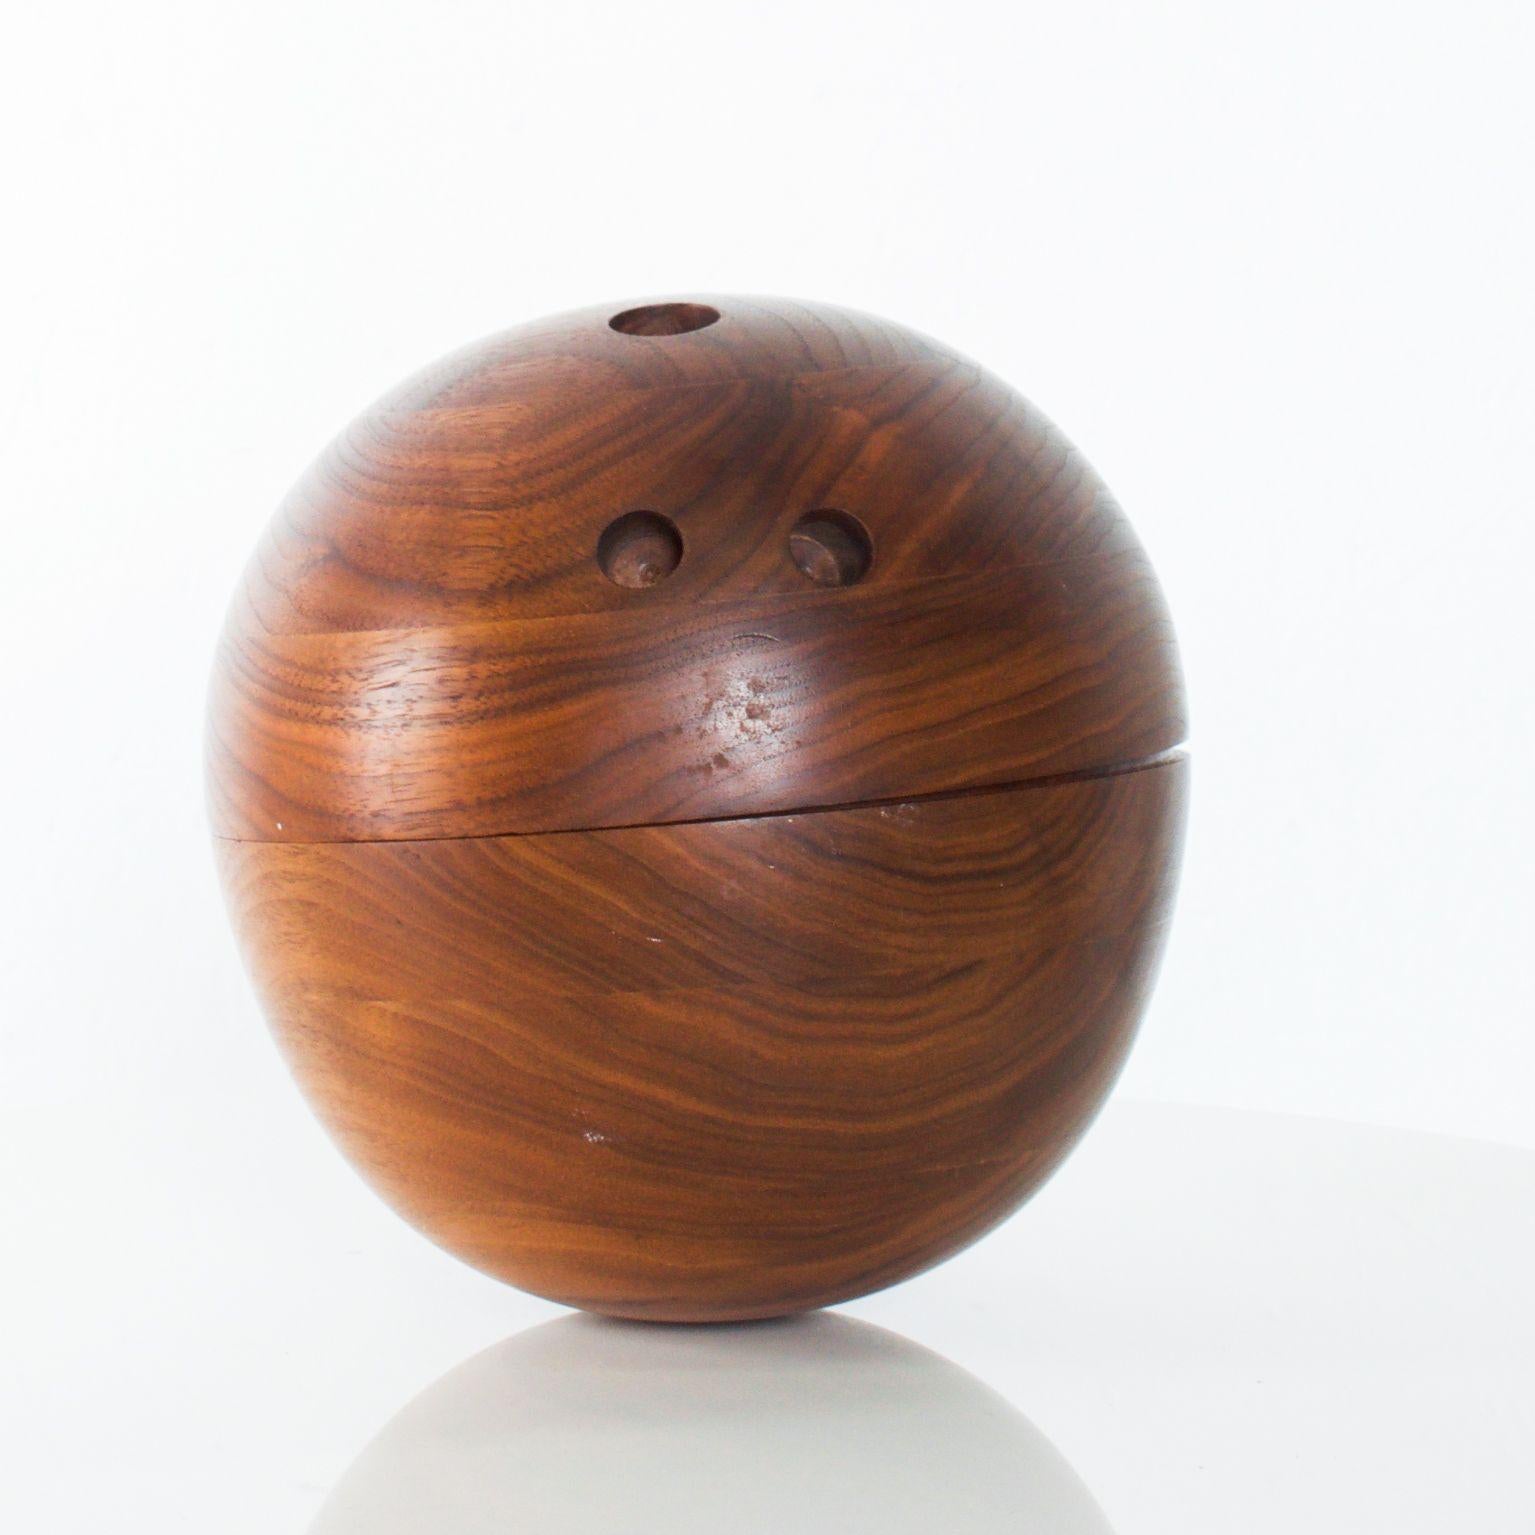 For your consideration: Modern designed bowling ball in walnut wood. Use as a covered box, bowl, dish, catch it all, keepsake or secret compartment hiding place!

Dimensions: 8